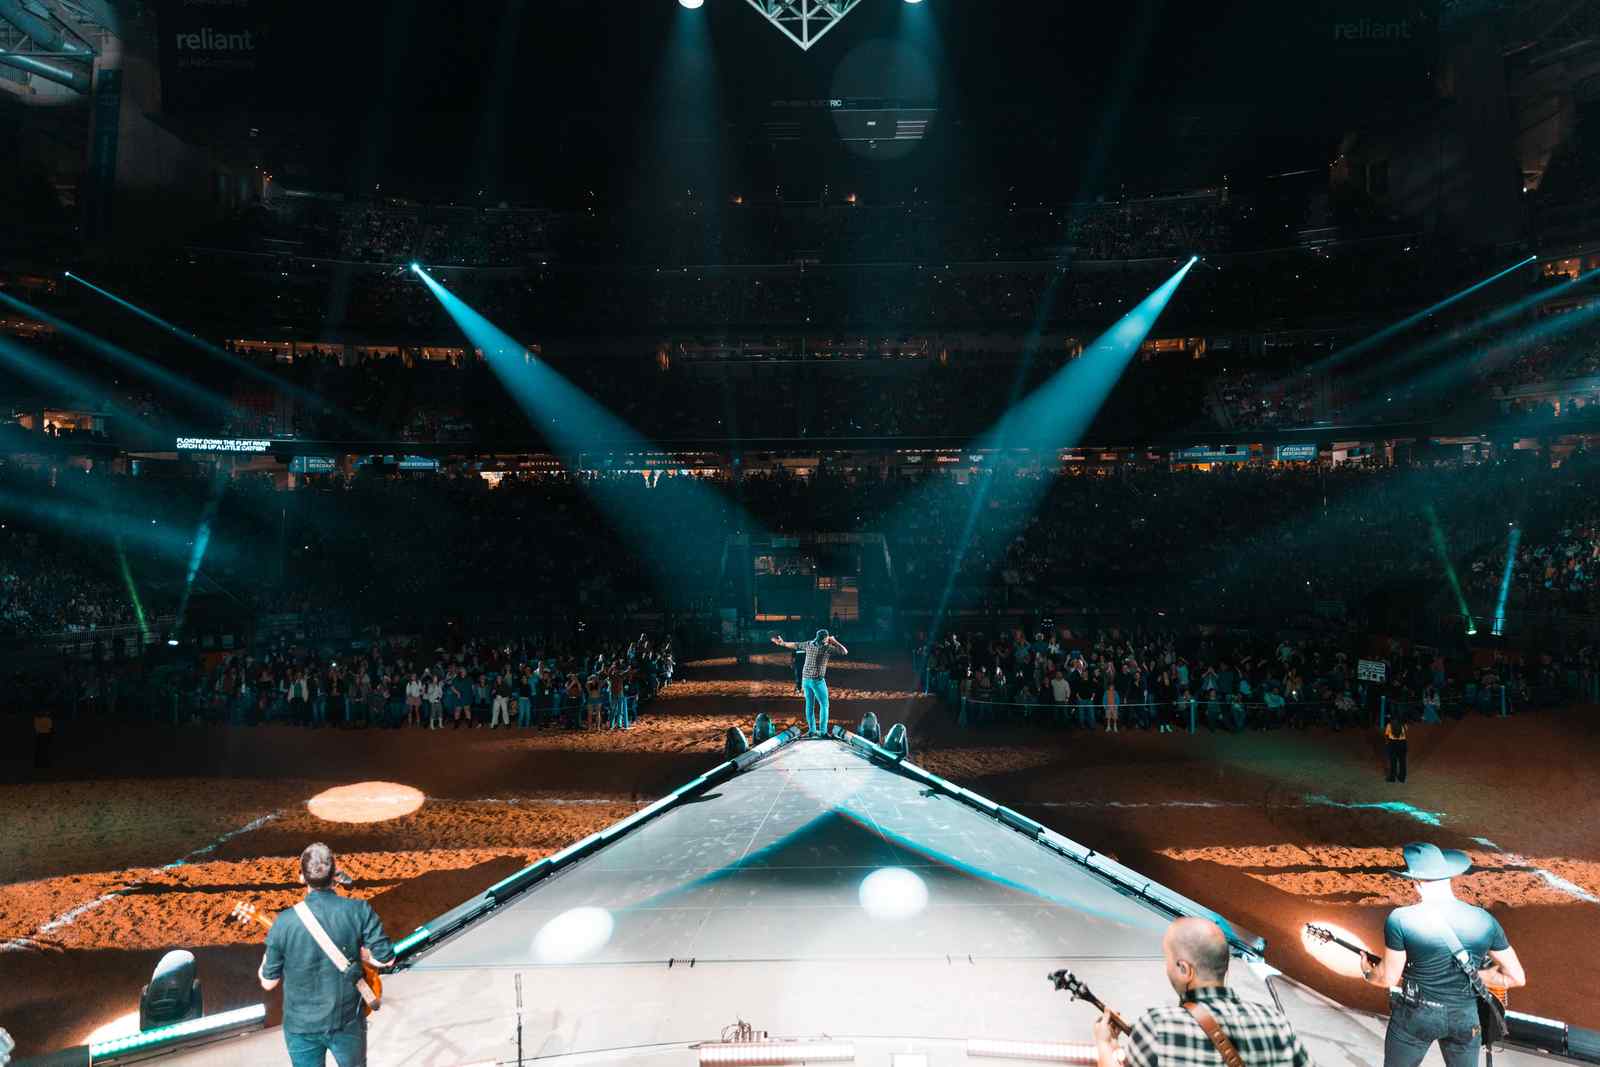 LUKE BRYAN WRAPPED UP HOUSTON LIVESTOCK SHOW AND RODEO™ with LARGEST ATTENDANCE OF THE SEASON - 74,779 Fans